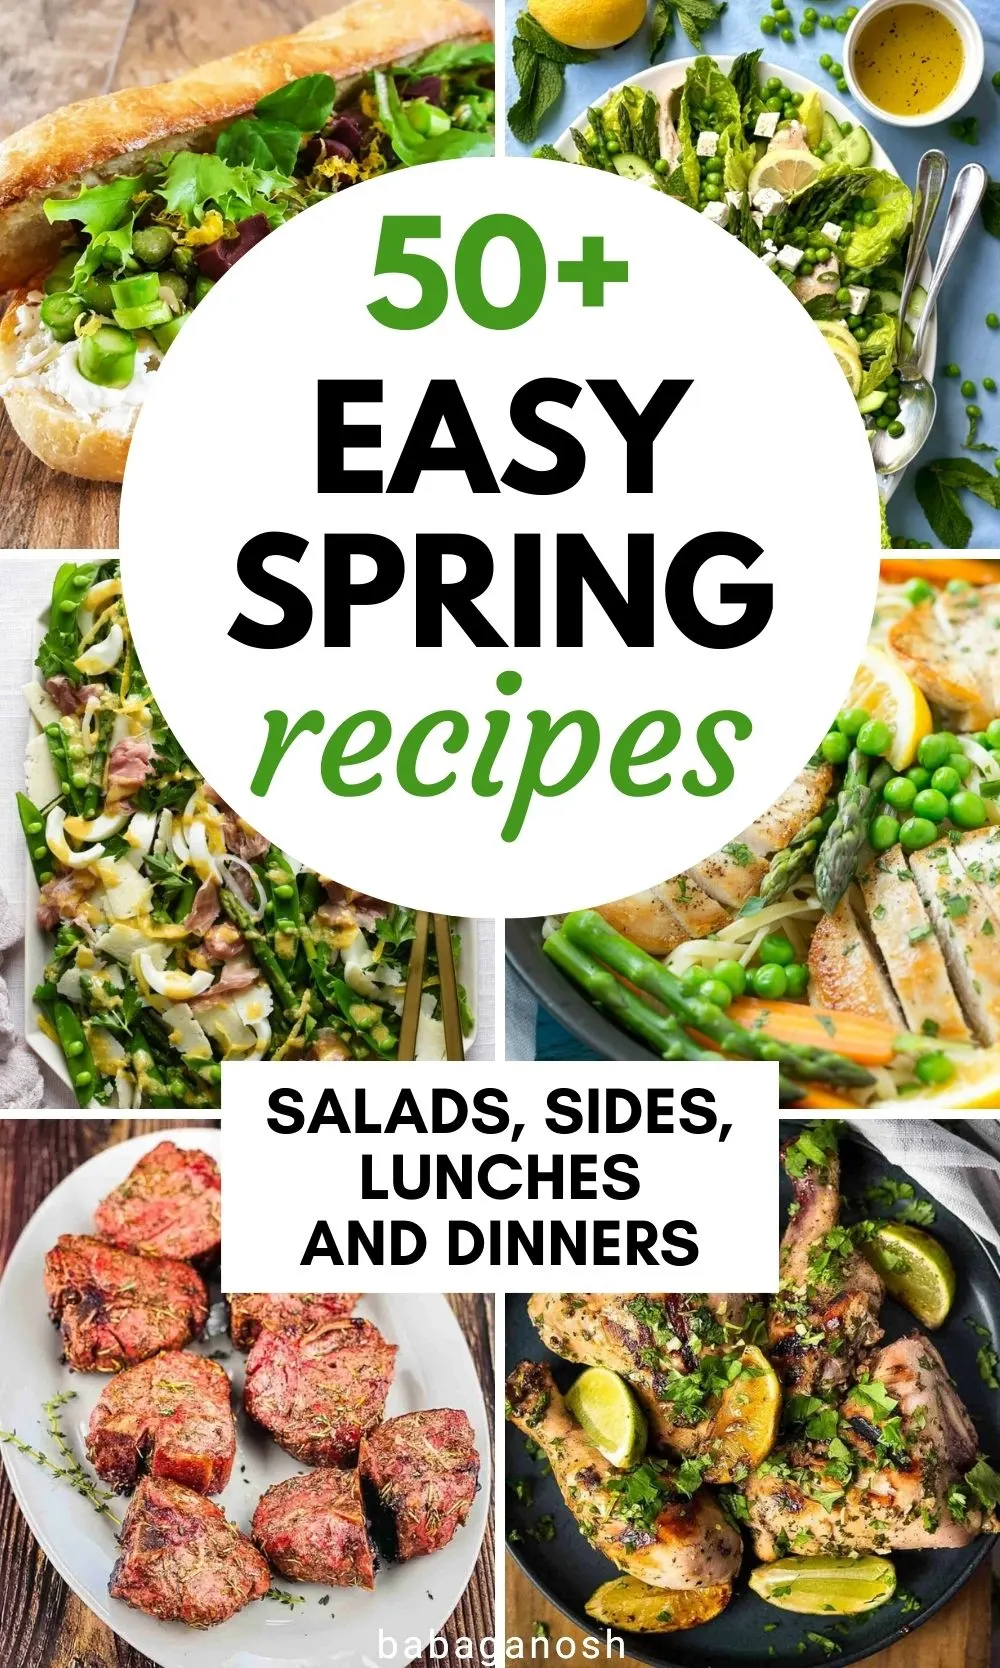 Pinterest graphic with text that reads "50+ Easy Spring recipes" and a collage of spring dishes.